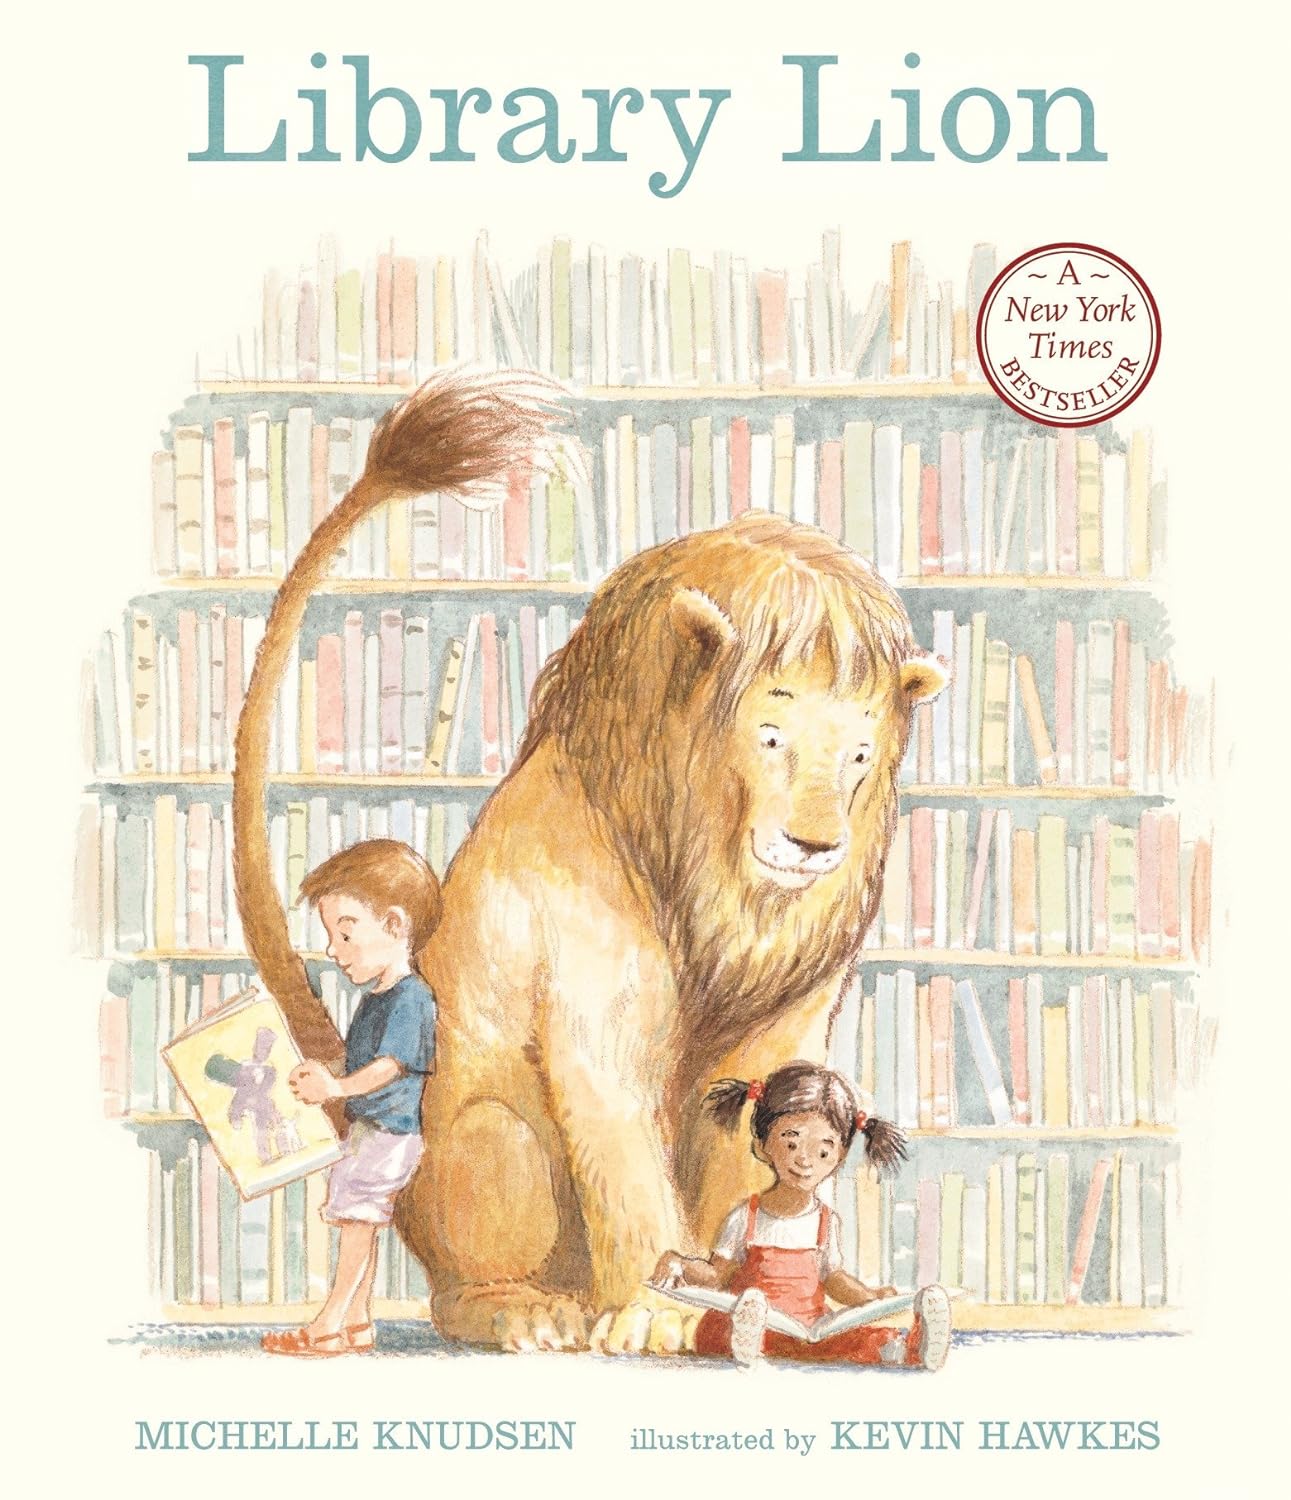 Books About Libraries6